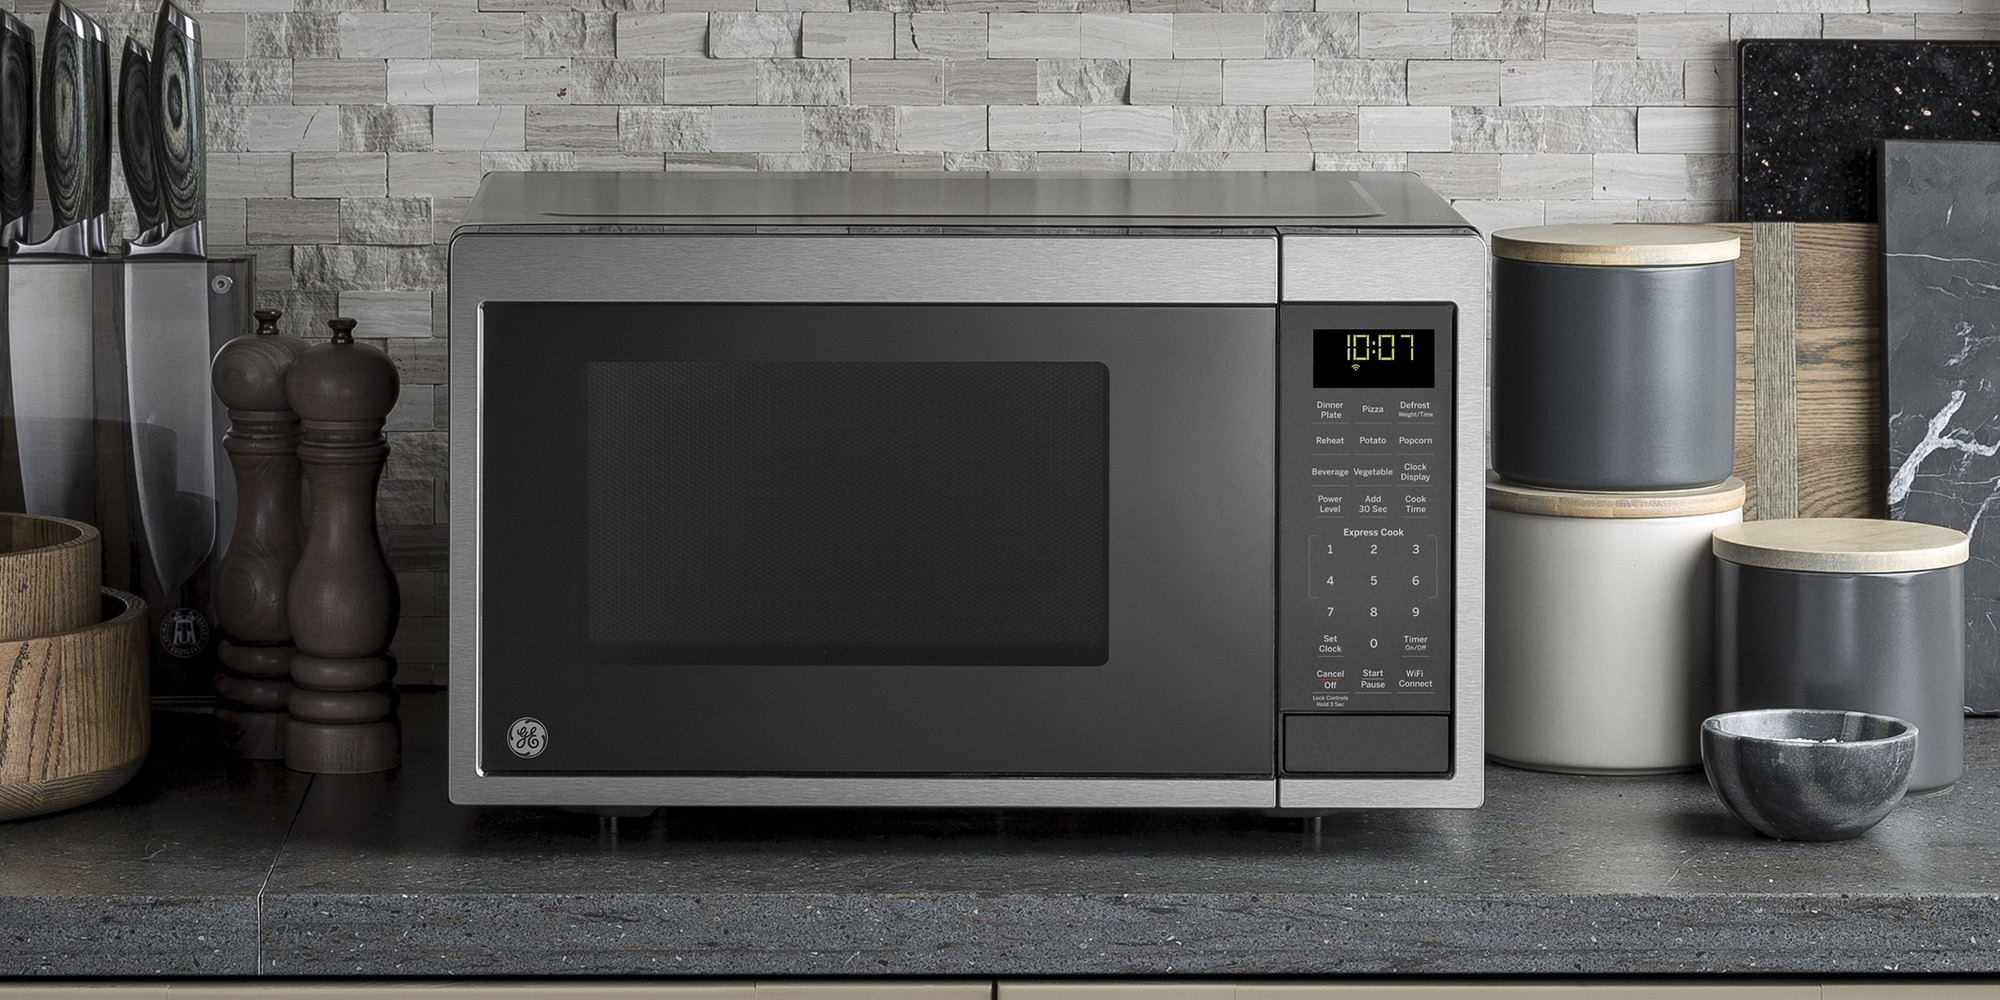 Google Assistant can now control your connected GE microwave.